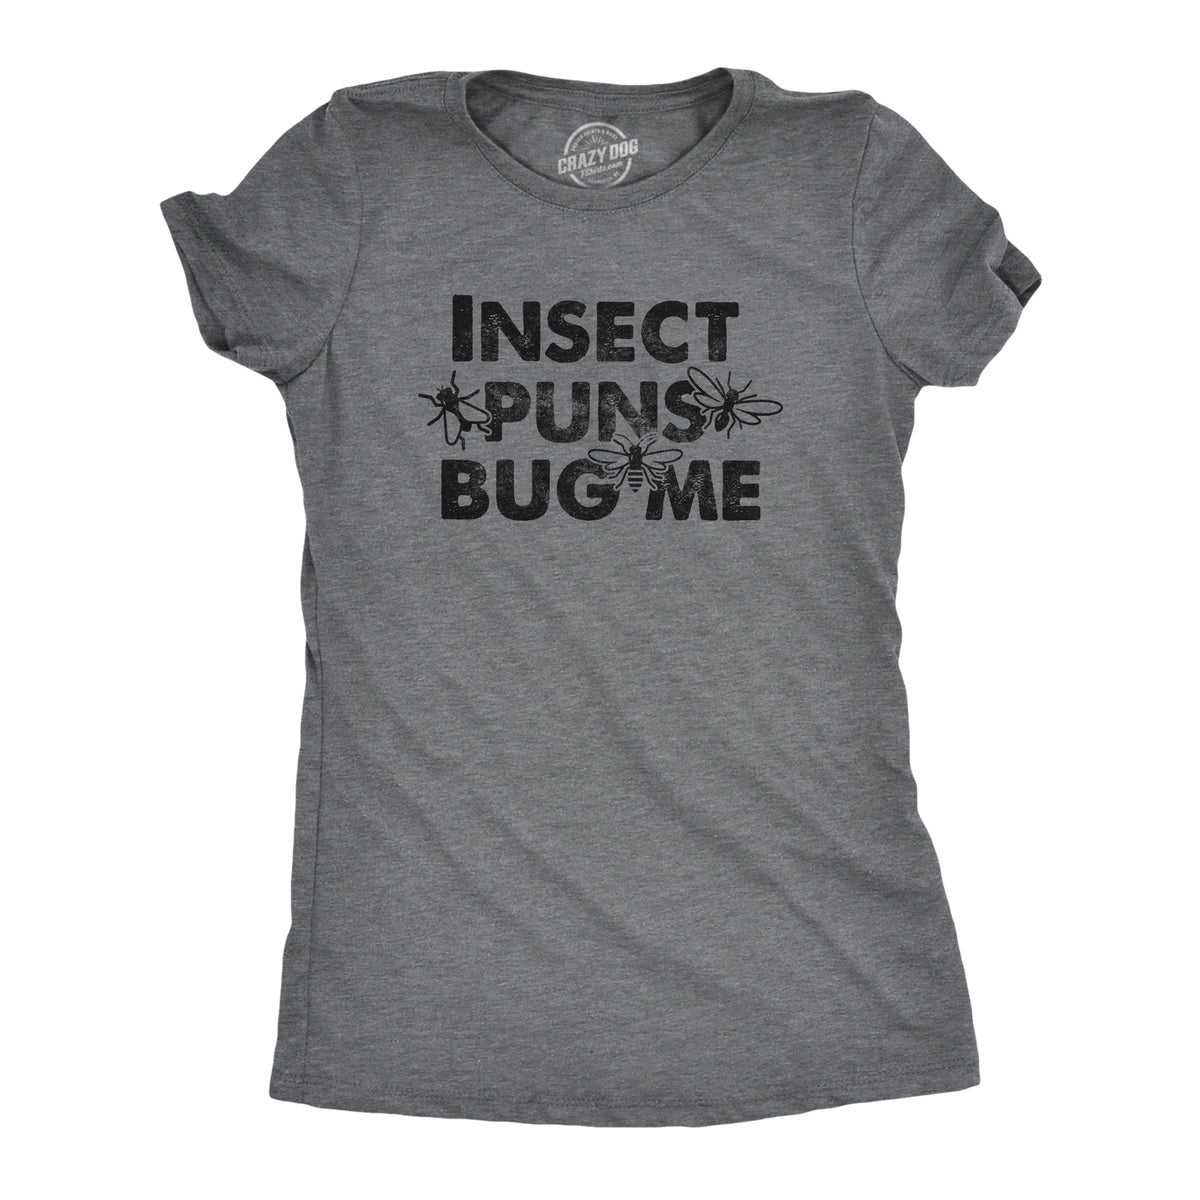 Funny Dark Heather Grey - INSECT Insect Puns Bug Me Womens T Shirt Nerdy sarcastic Tee